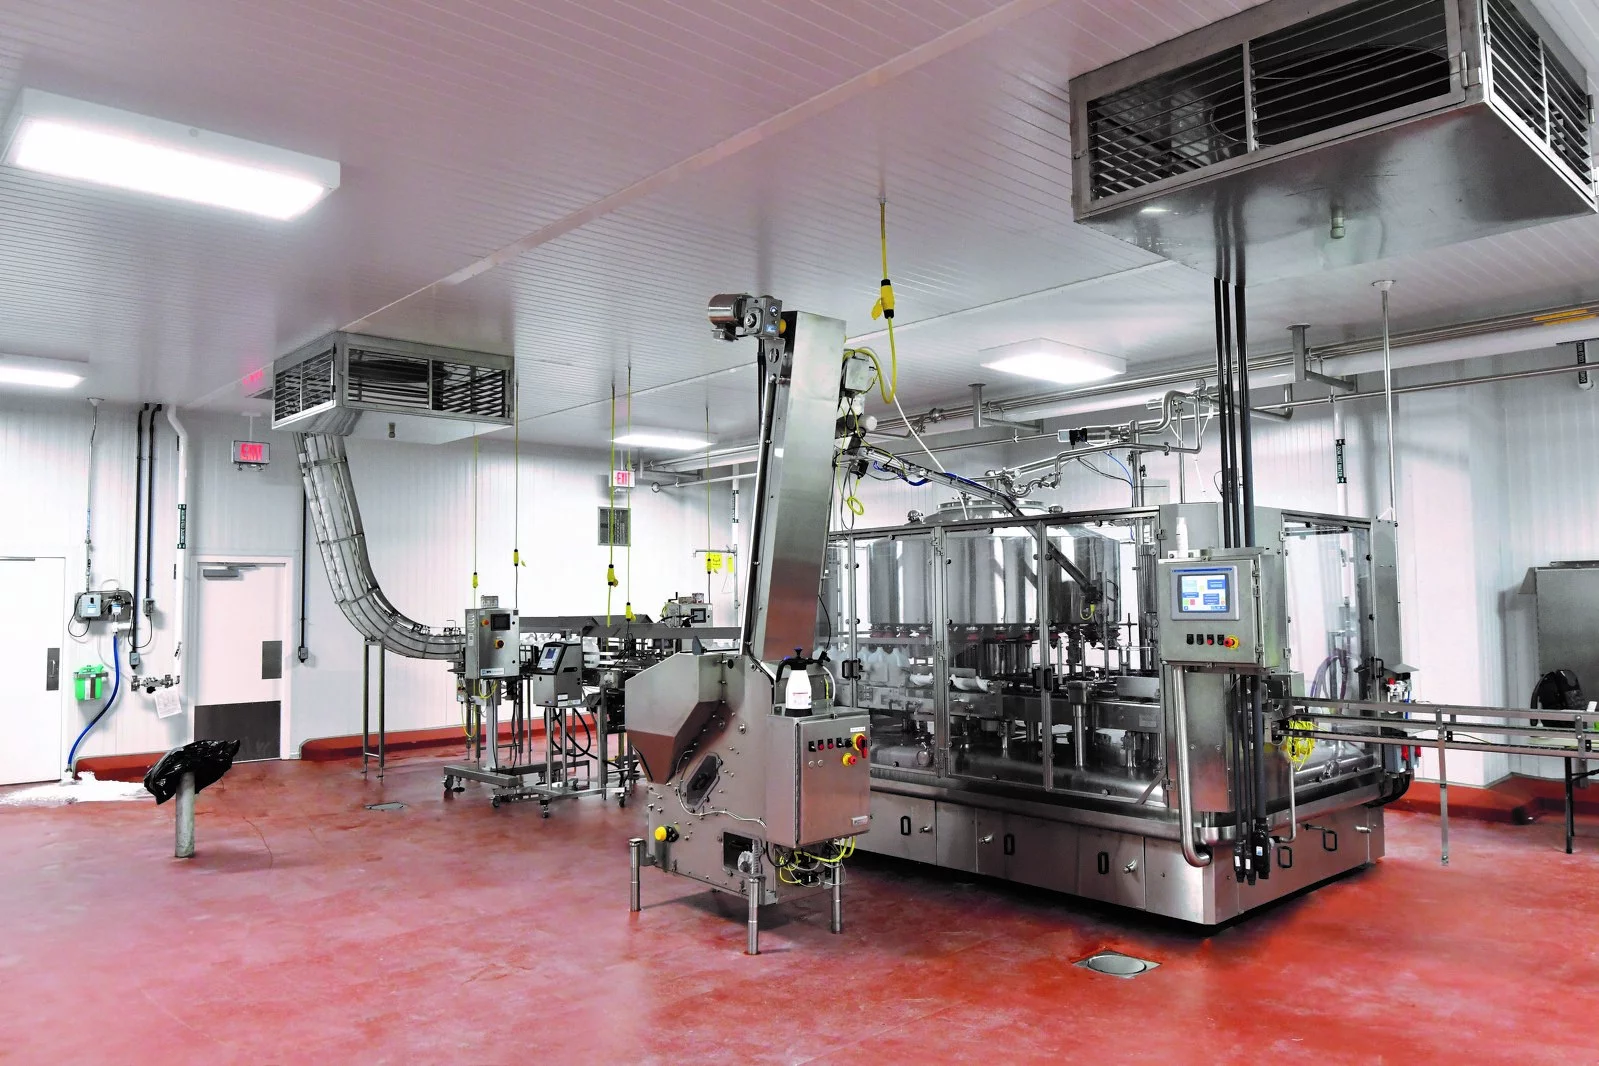 Interior Dairy Maid Facility, specialized machinery, red floor, vents, white walls.